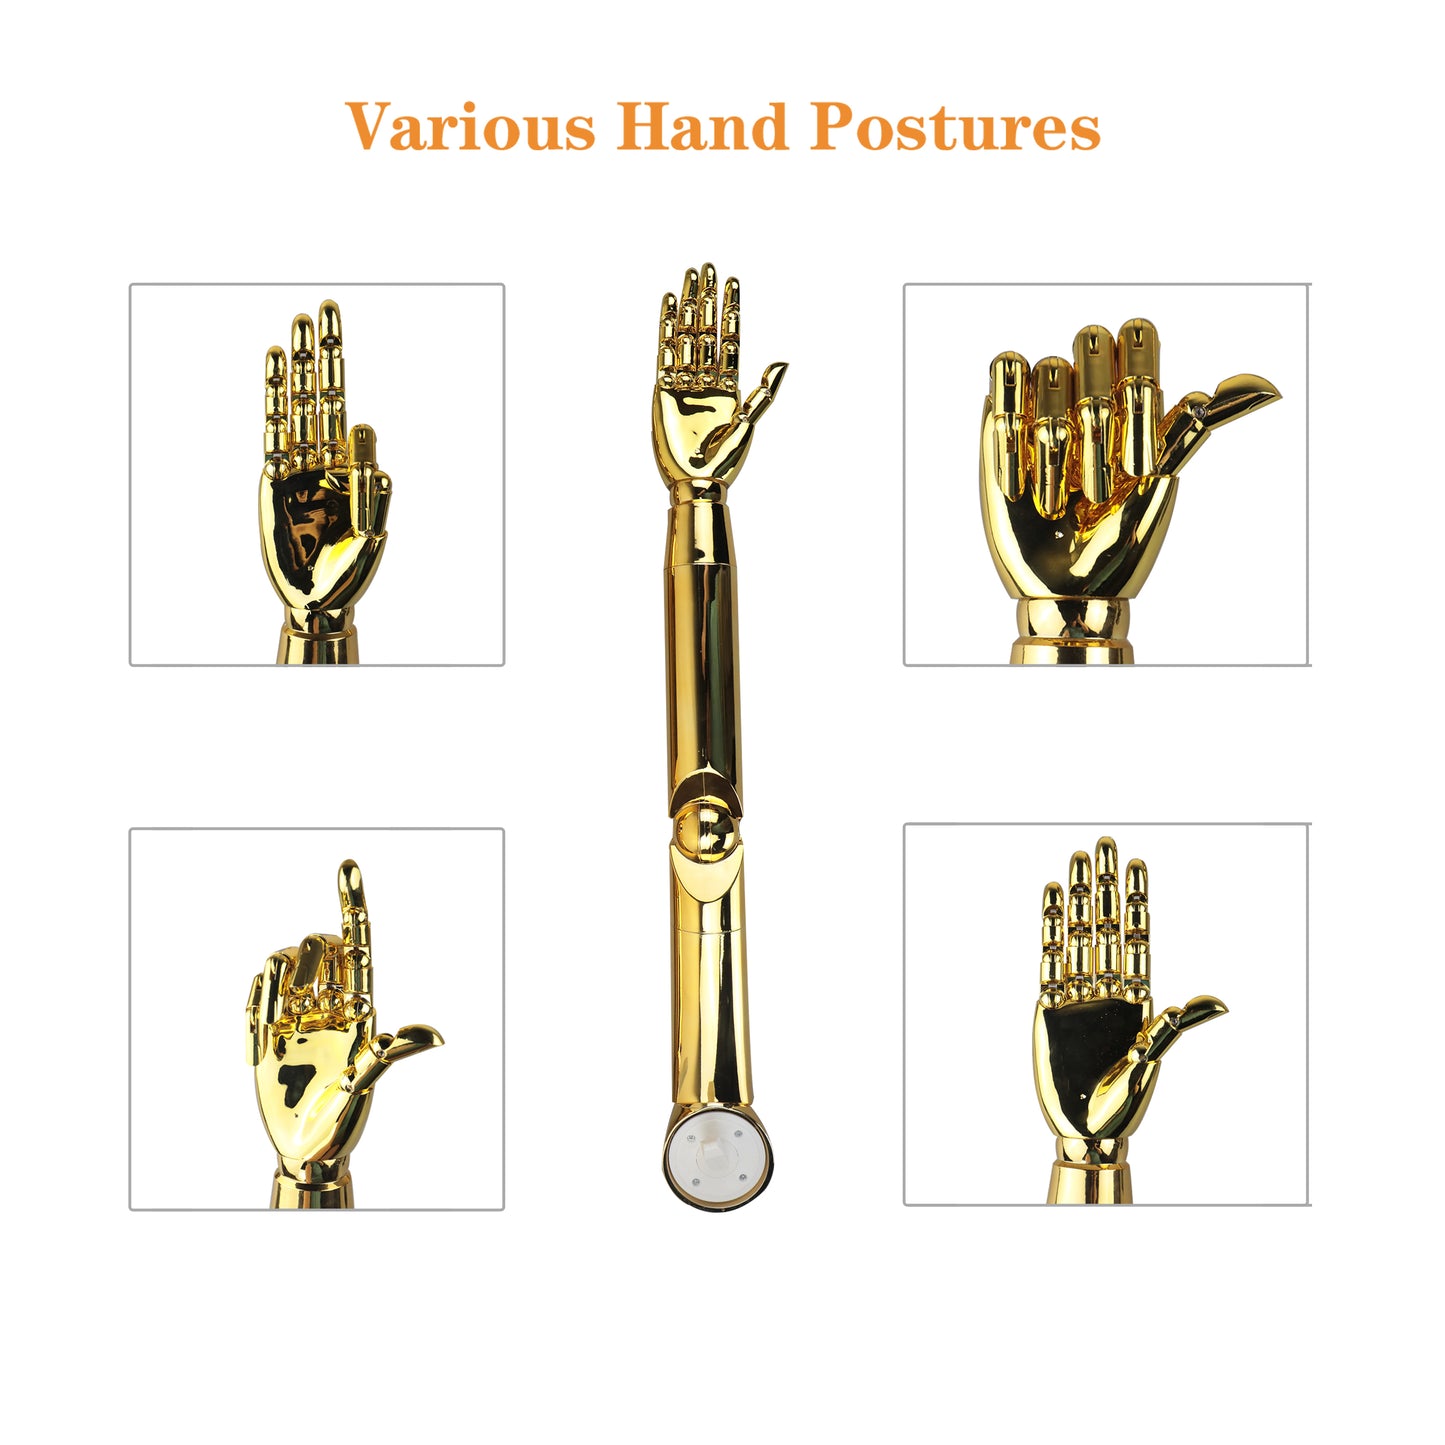 DE-LIANG Gold Chrome Hand Mannequin from Mannequin Body Plug In Arm Mannequin Moveable Fingers Joints